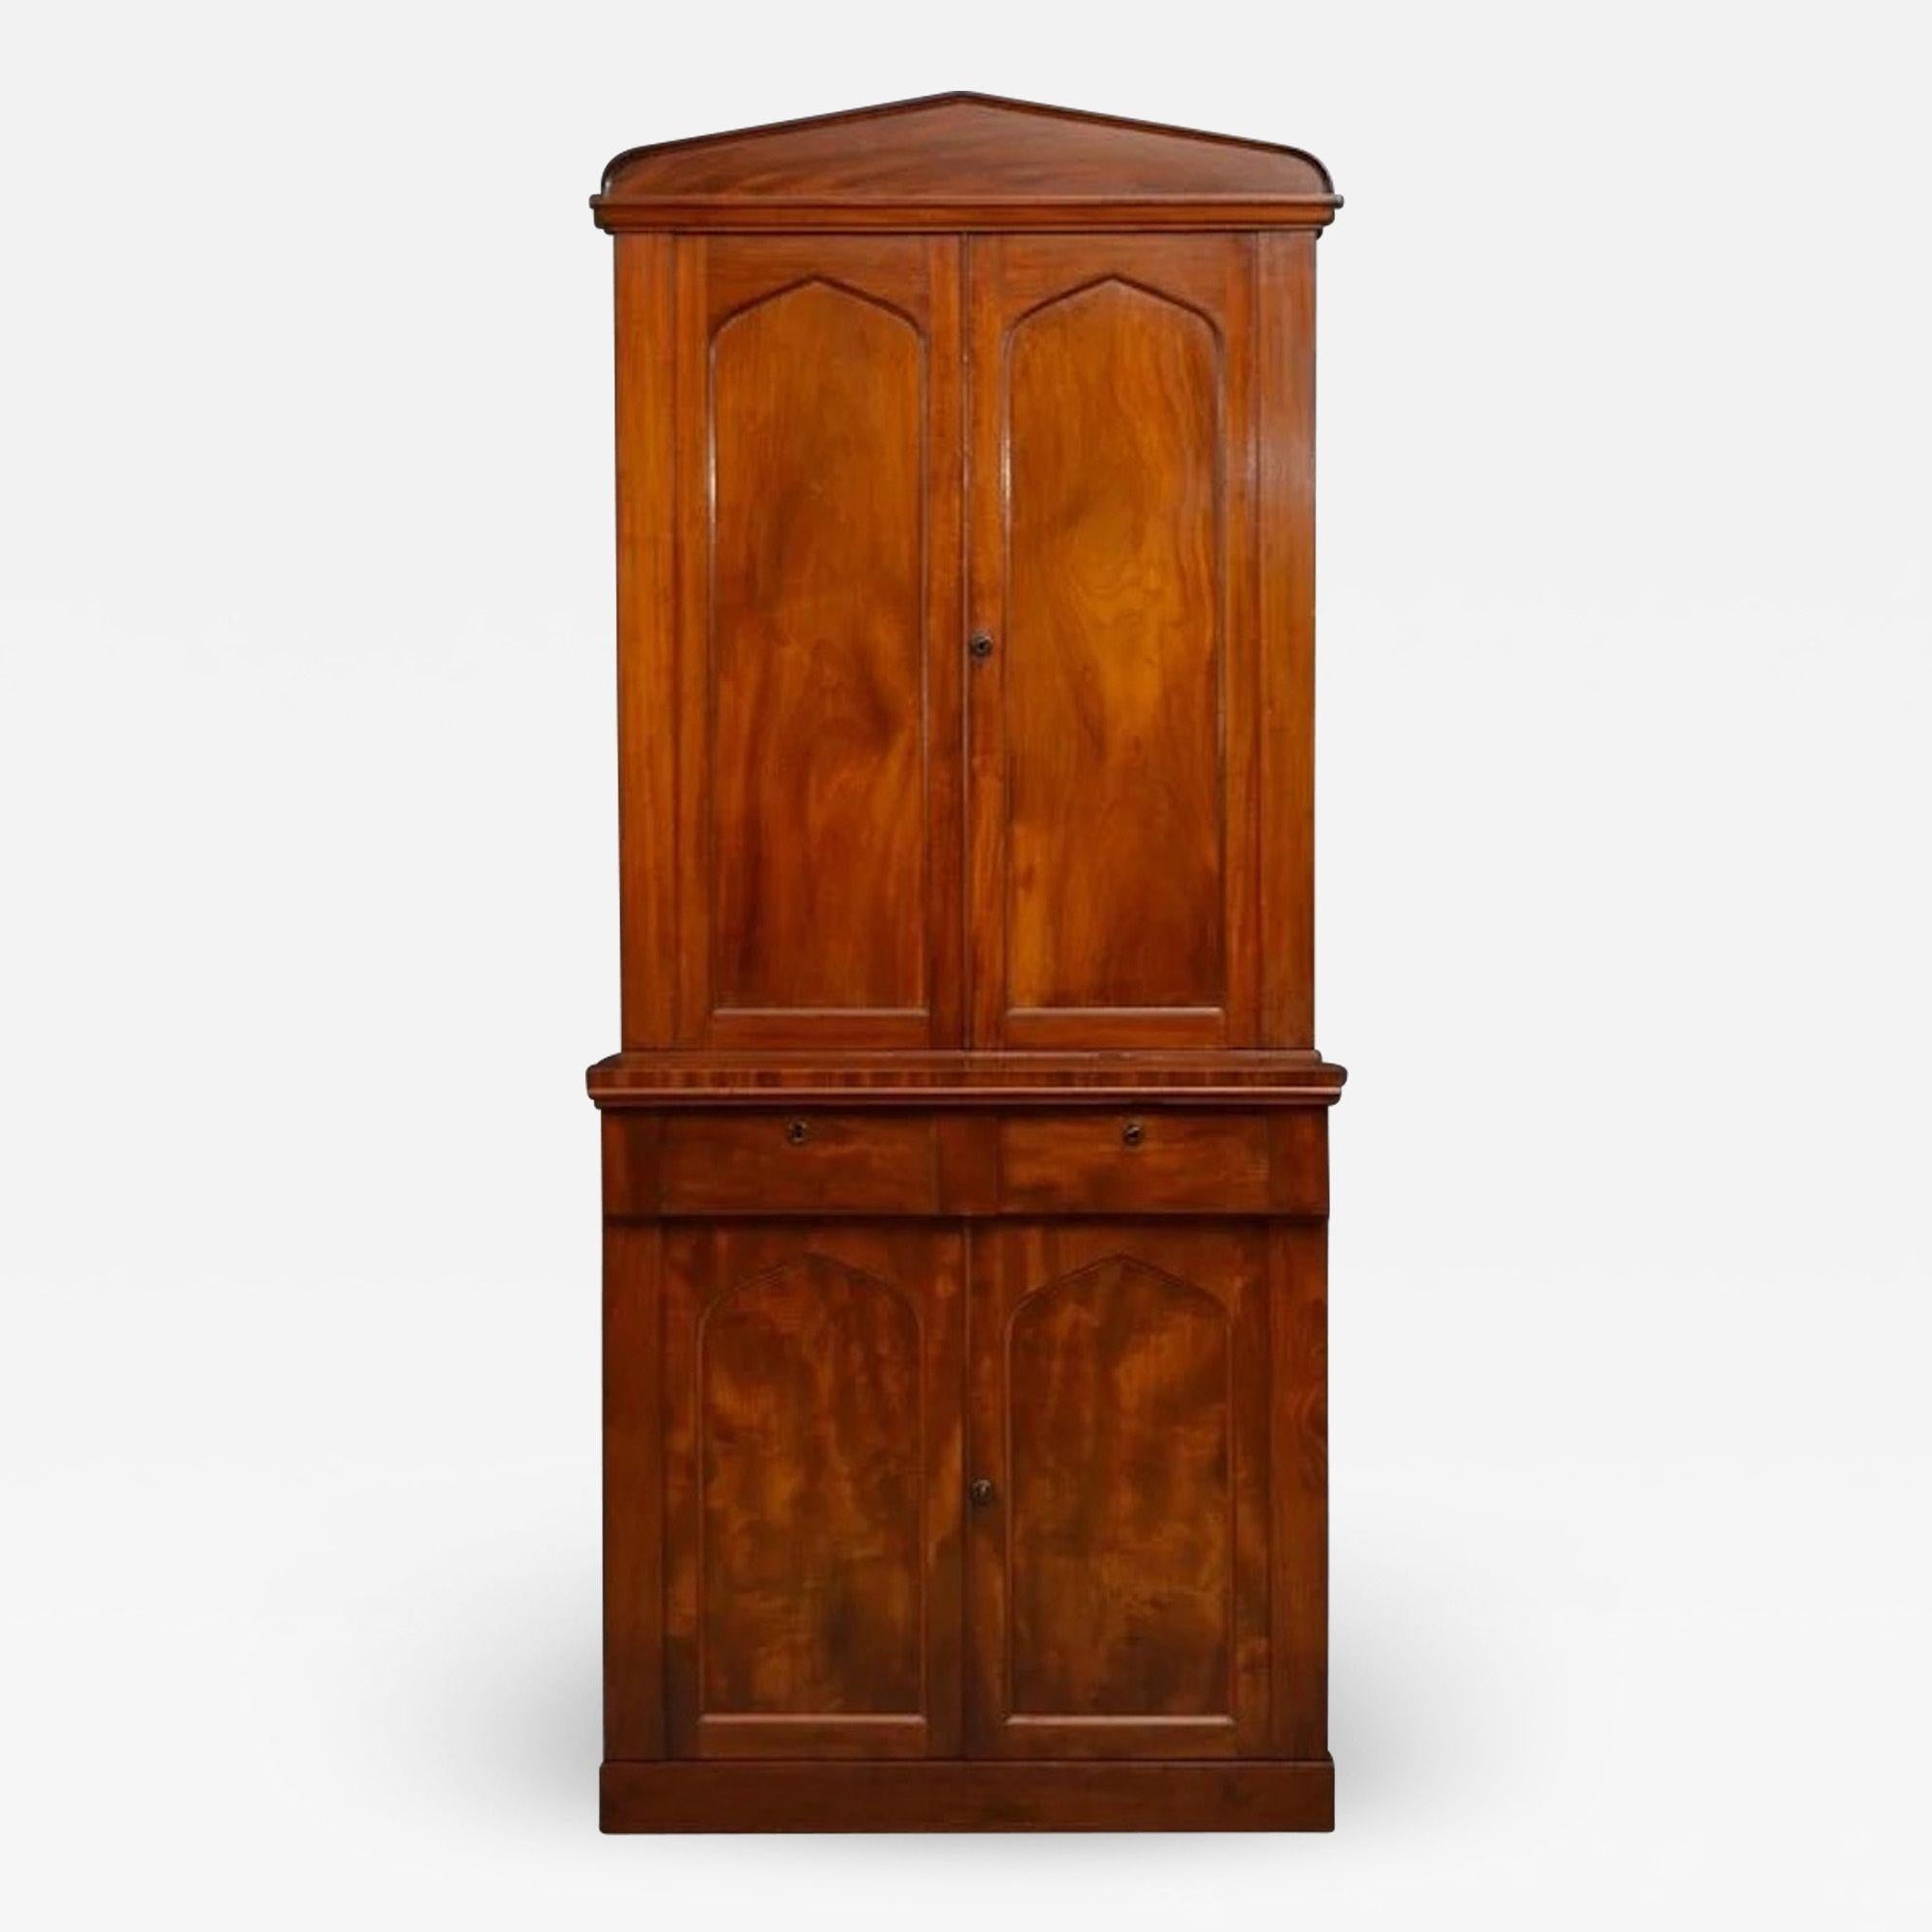 Sn655 a fine quality William IV, mahogany bookcase, having architectural pediment to the top above two arched panelled doors which open to reveal three height adjustable shelves above projecting base with two drawers, one enclosing a sliding leather